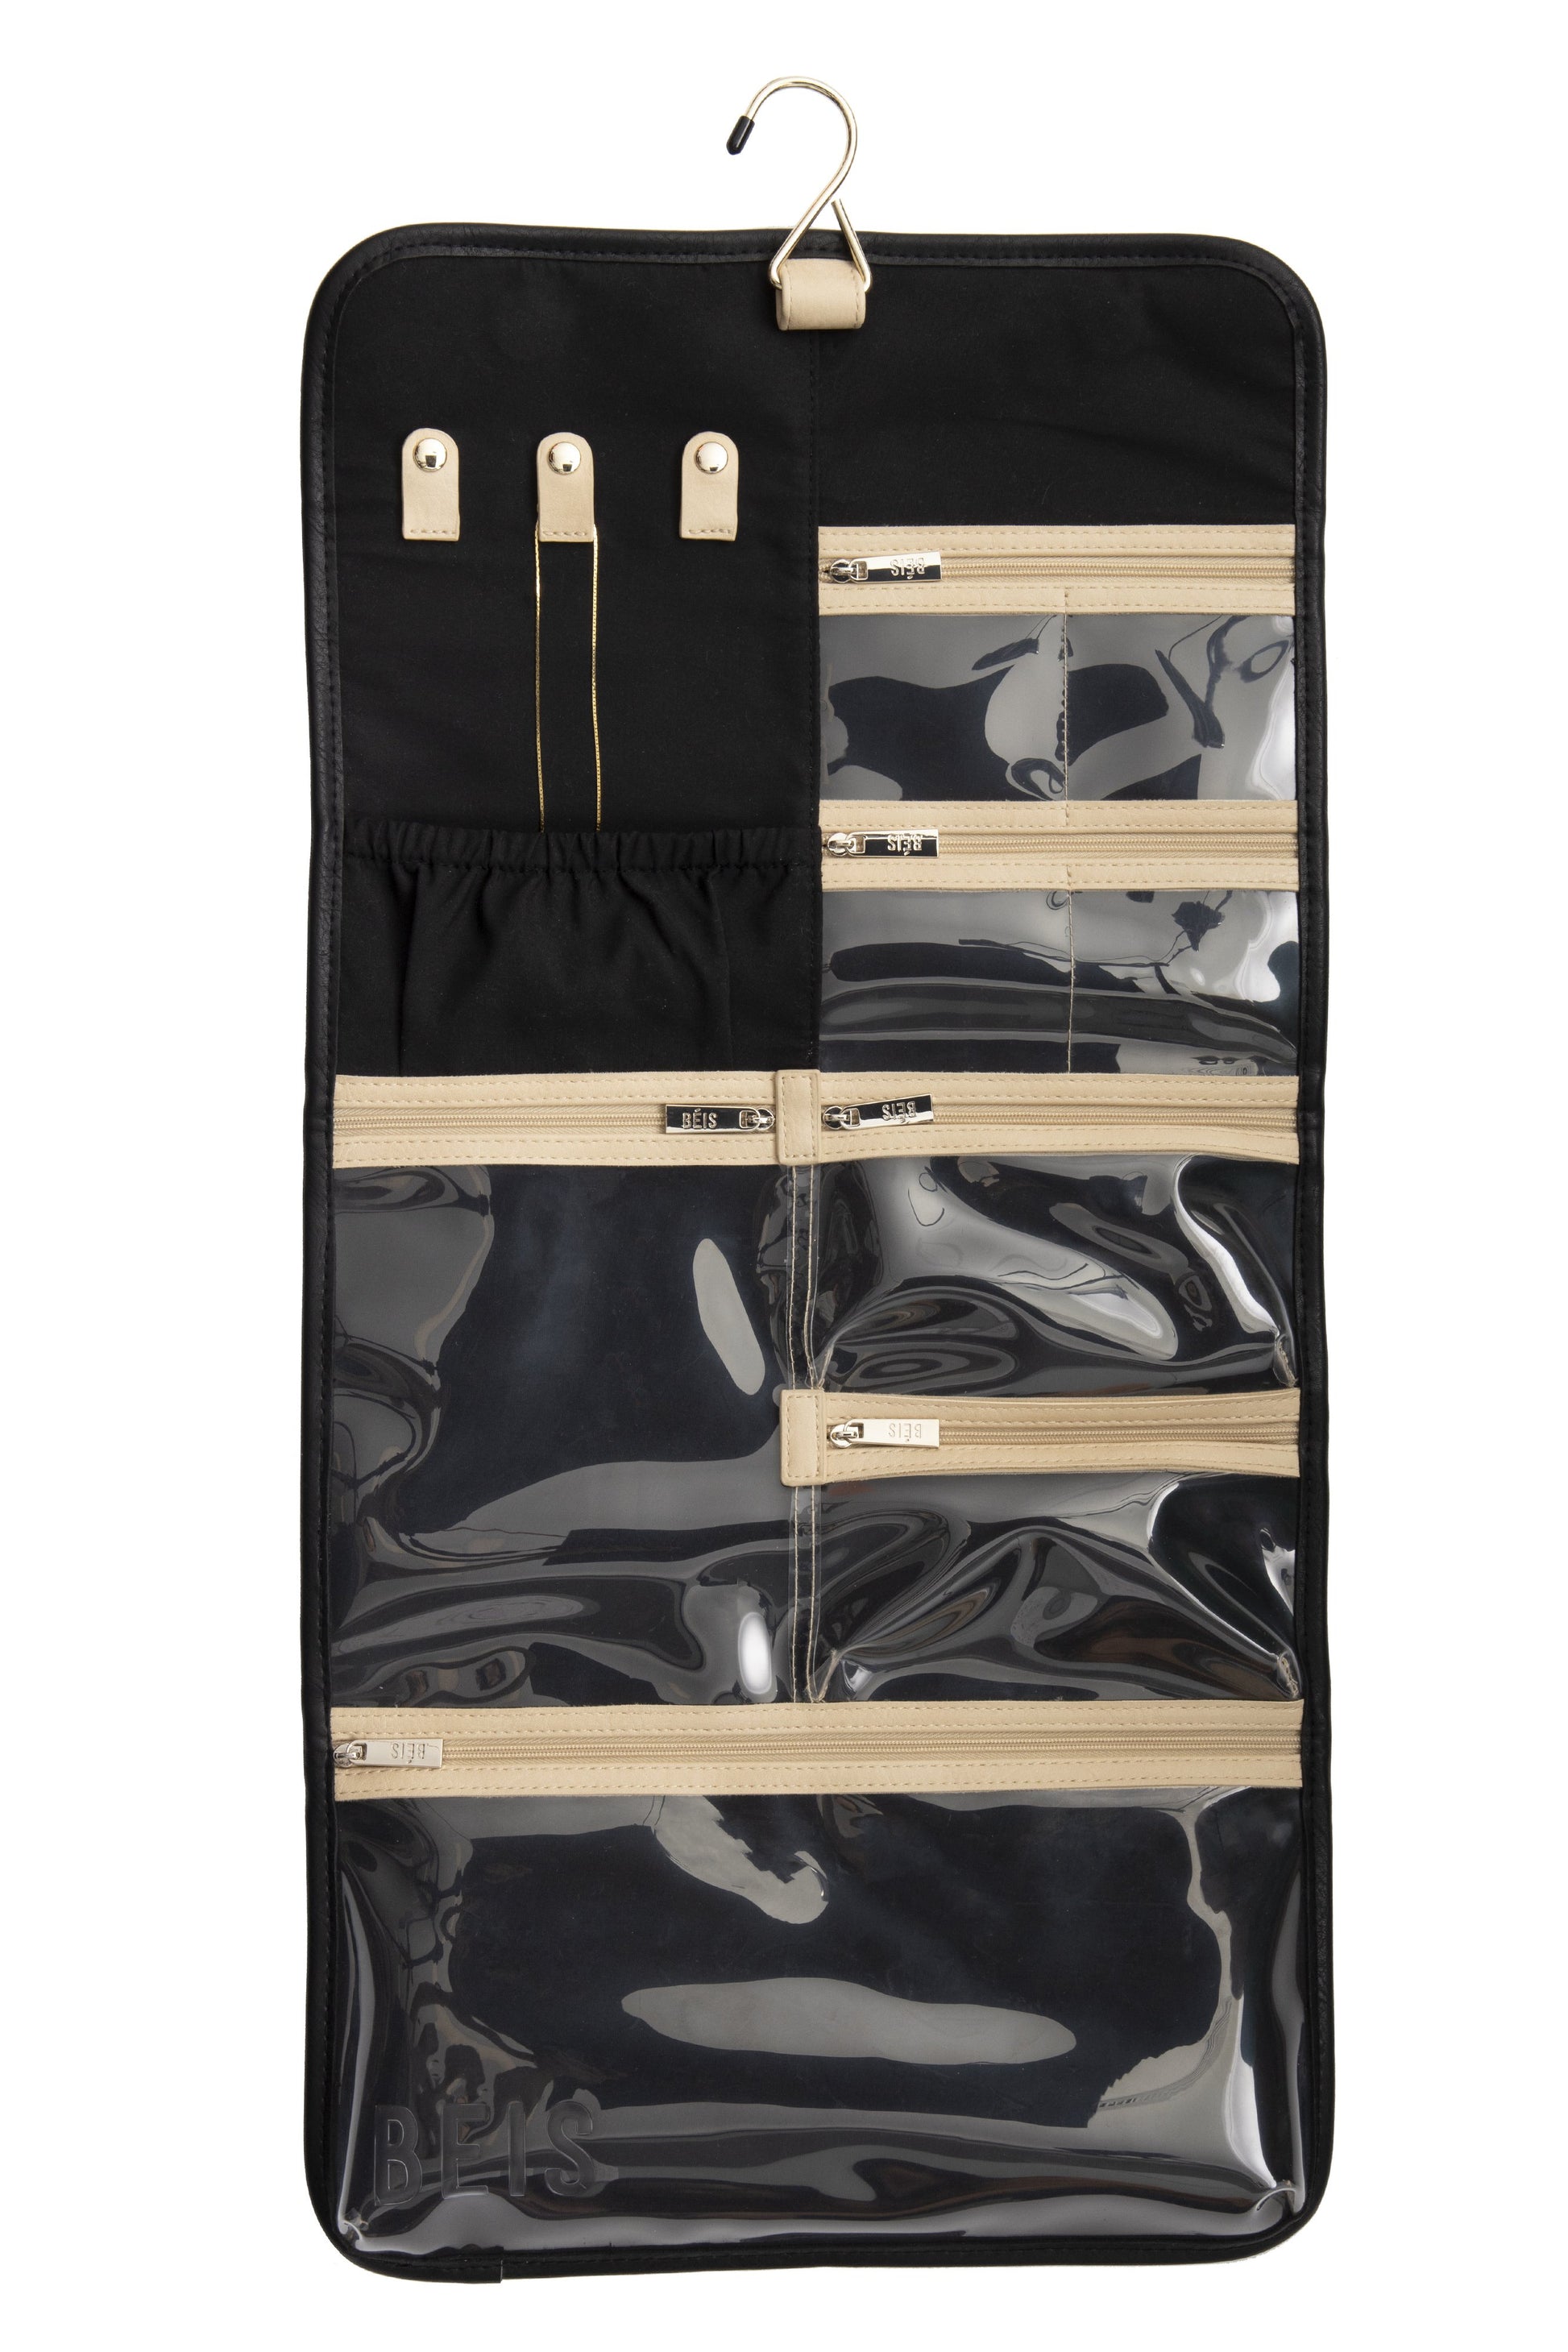 Hanging Jewelry Case in Black, opened showing all compartments 